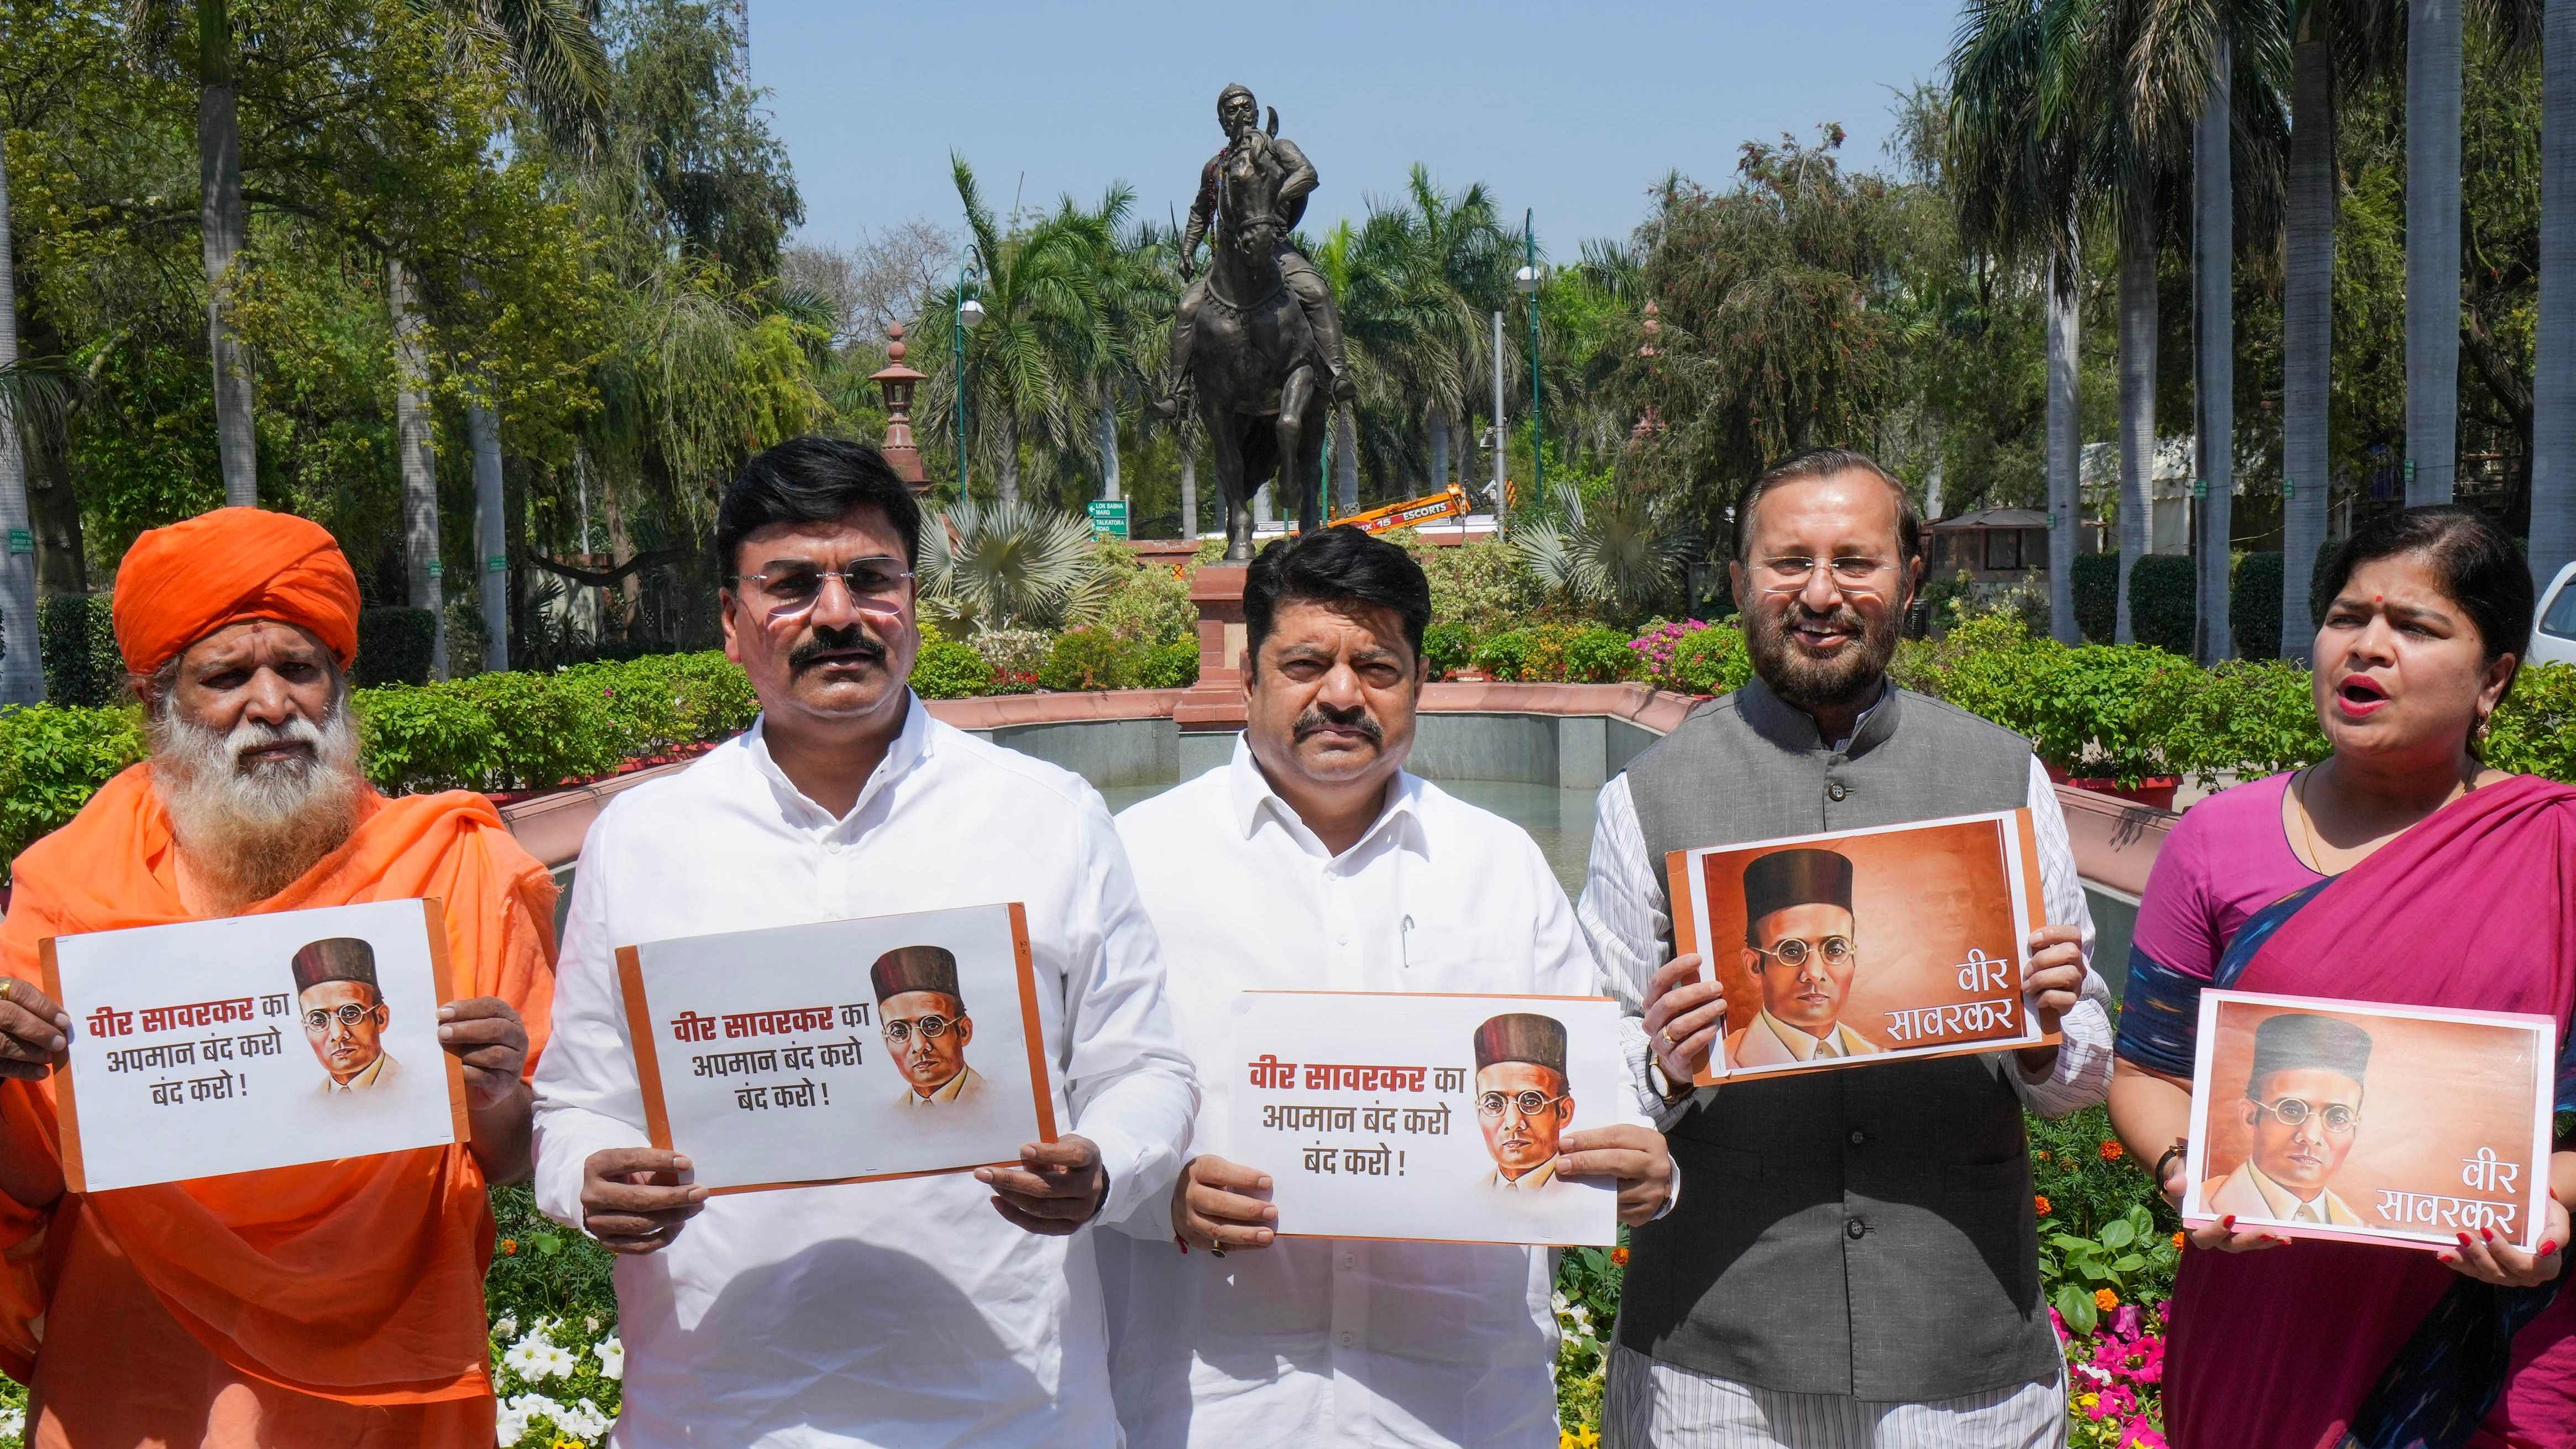 Maharashtra BJP MPs stage a protest in front of the Shivaji statue in Parliament House against Congress leader Rahul Gandhi over his alleged controversial remarks on Hindutva ideologue V.D. Savarkar, in New Delhi, Monday, March 27, 2023.  Credit: PTI Photo